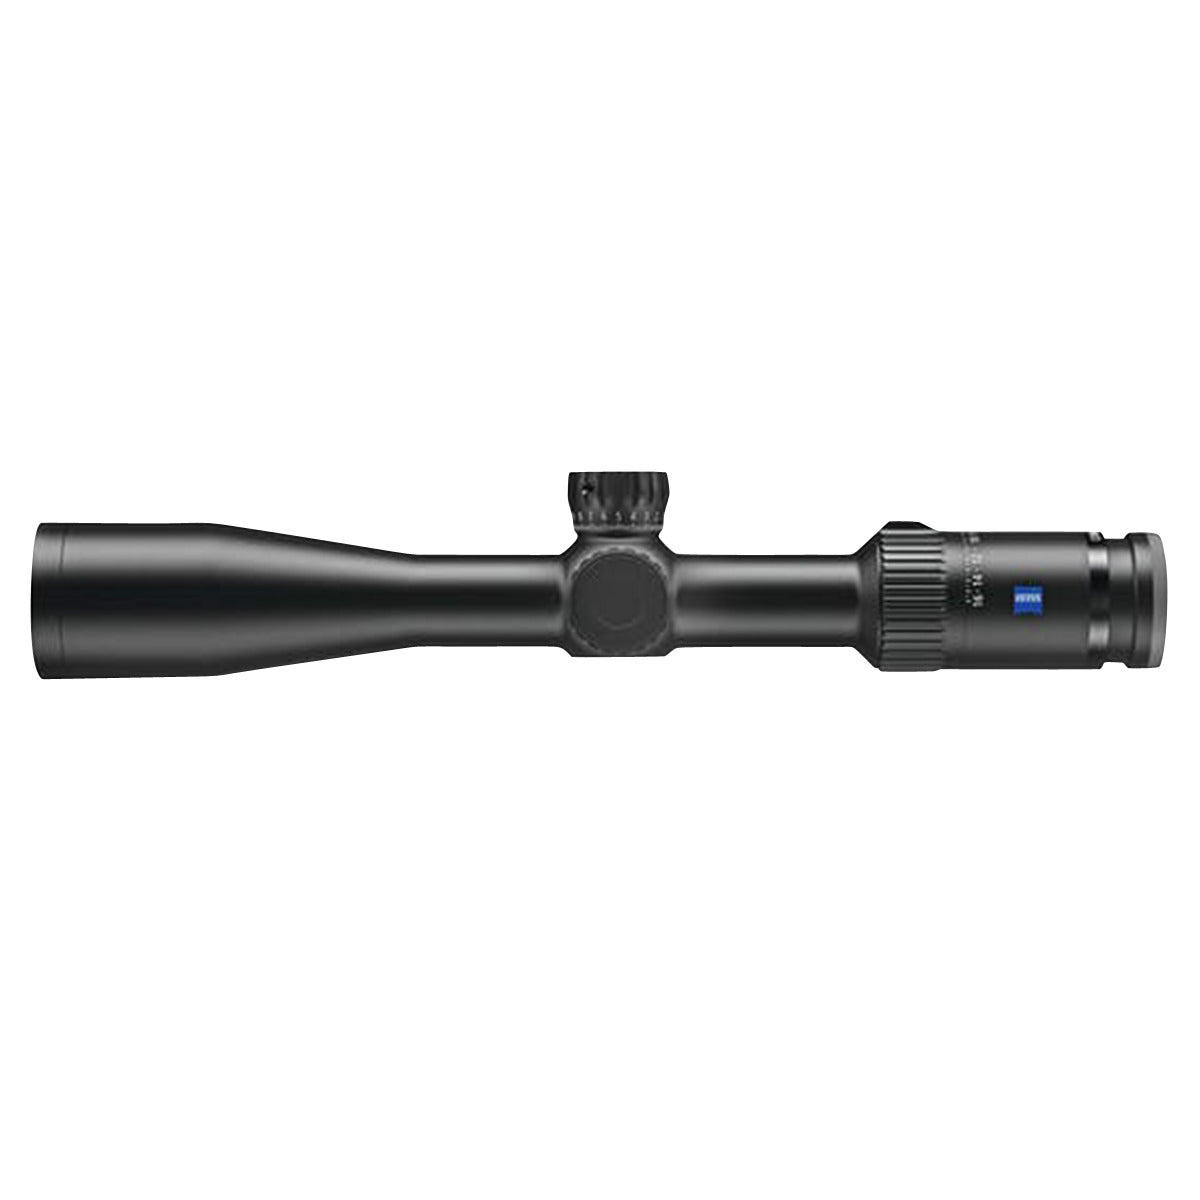 Zeiss Conquest V4 4-16x44 ZMOAi-T30 Illuminated #64 Reticle Ext. Locking Windage Riflescope in Zeiss Conquest V4 4-16x44 ZMOA-T #64 Riflescope by Zeiss | Optics - goHUNT Shop by GOHUNT | Zeiss - GOHUNT Shop